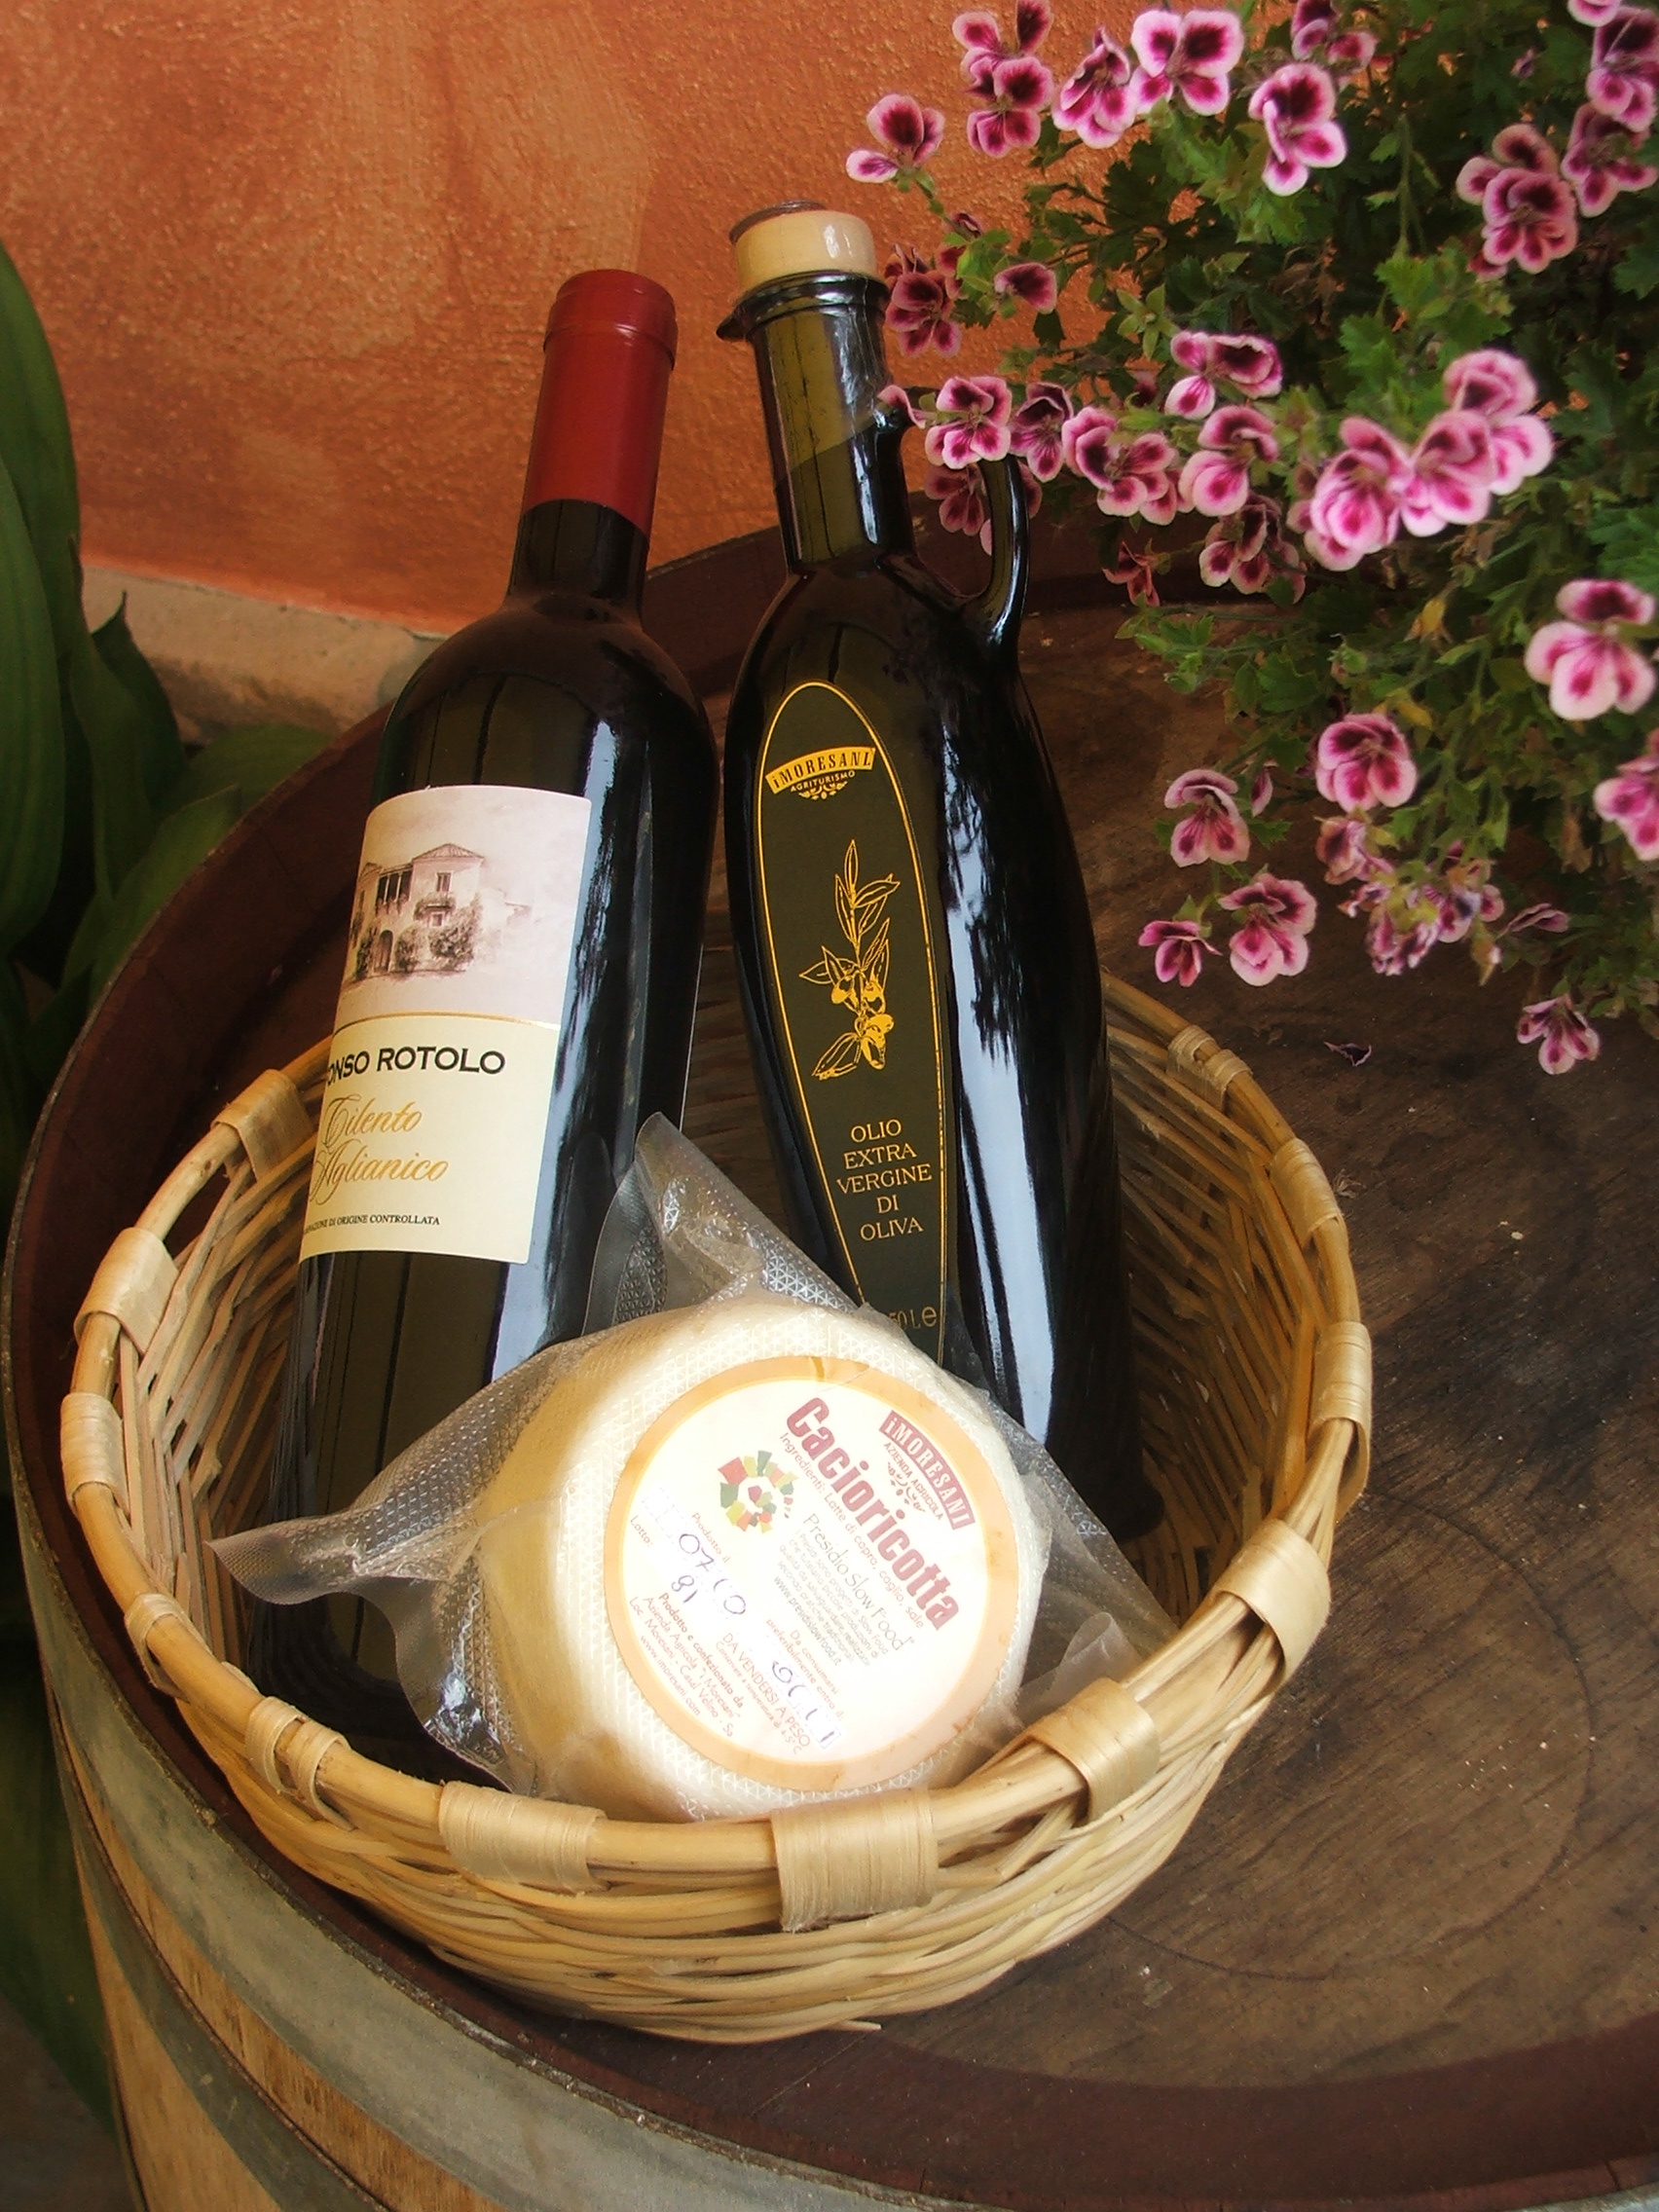 Delicious local cheeses and wine will feature on your trip to I Moresani